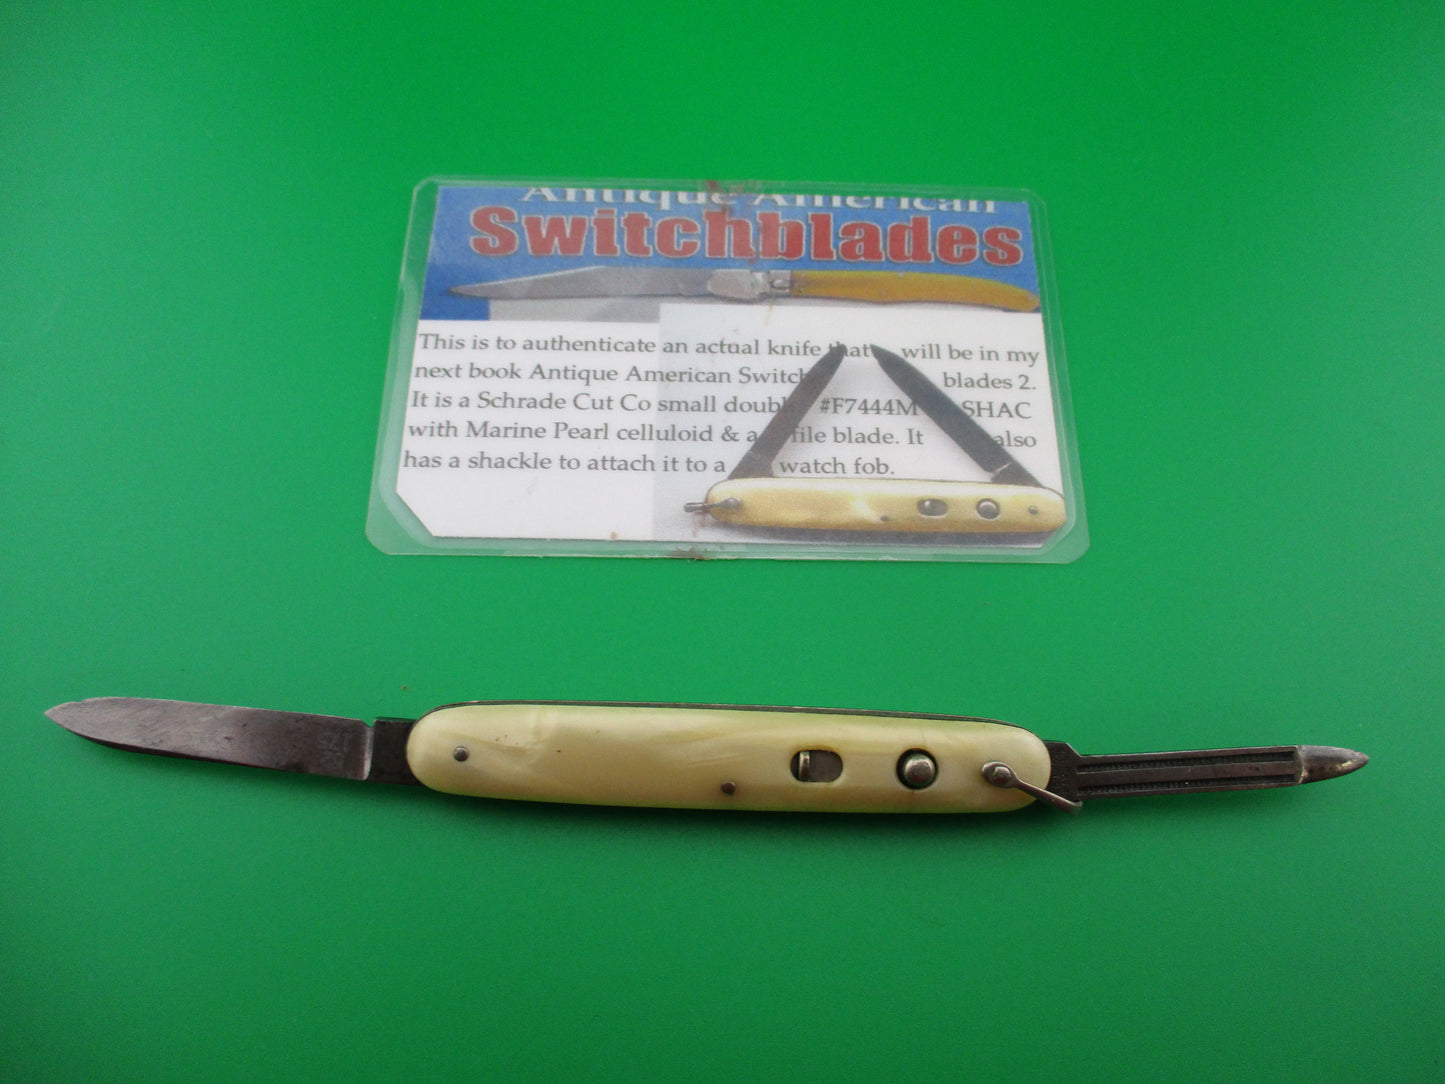 Schrade Cut Co Marine Pearl small double w shackle & file blade